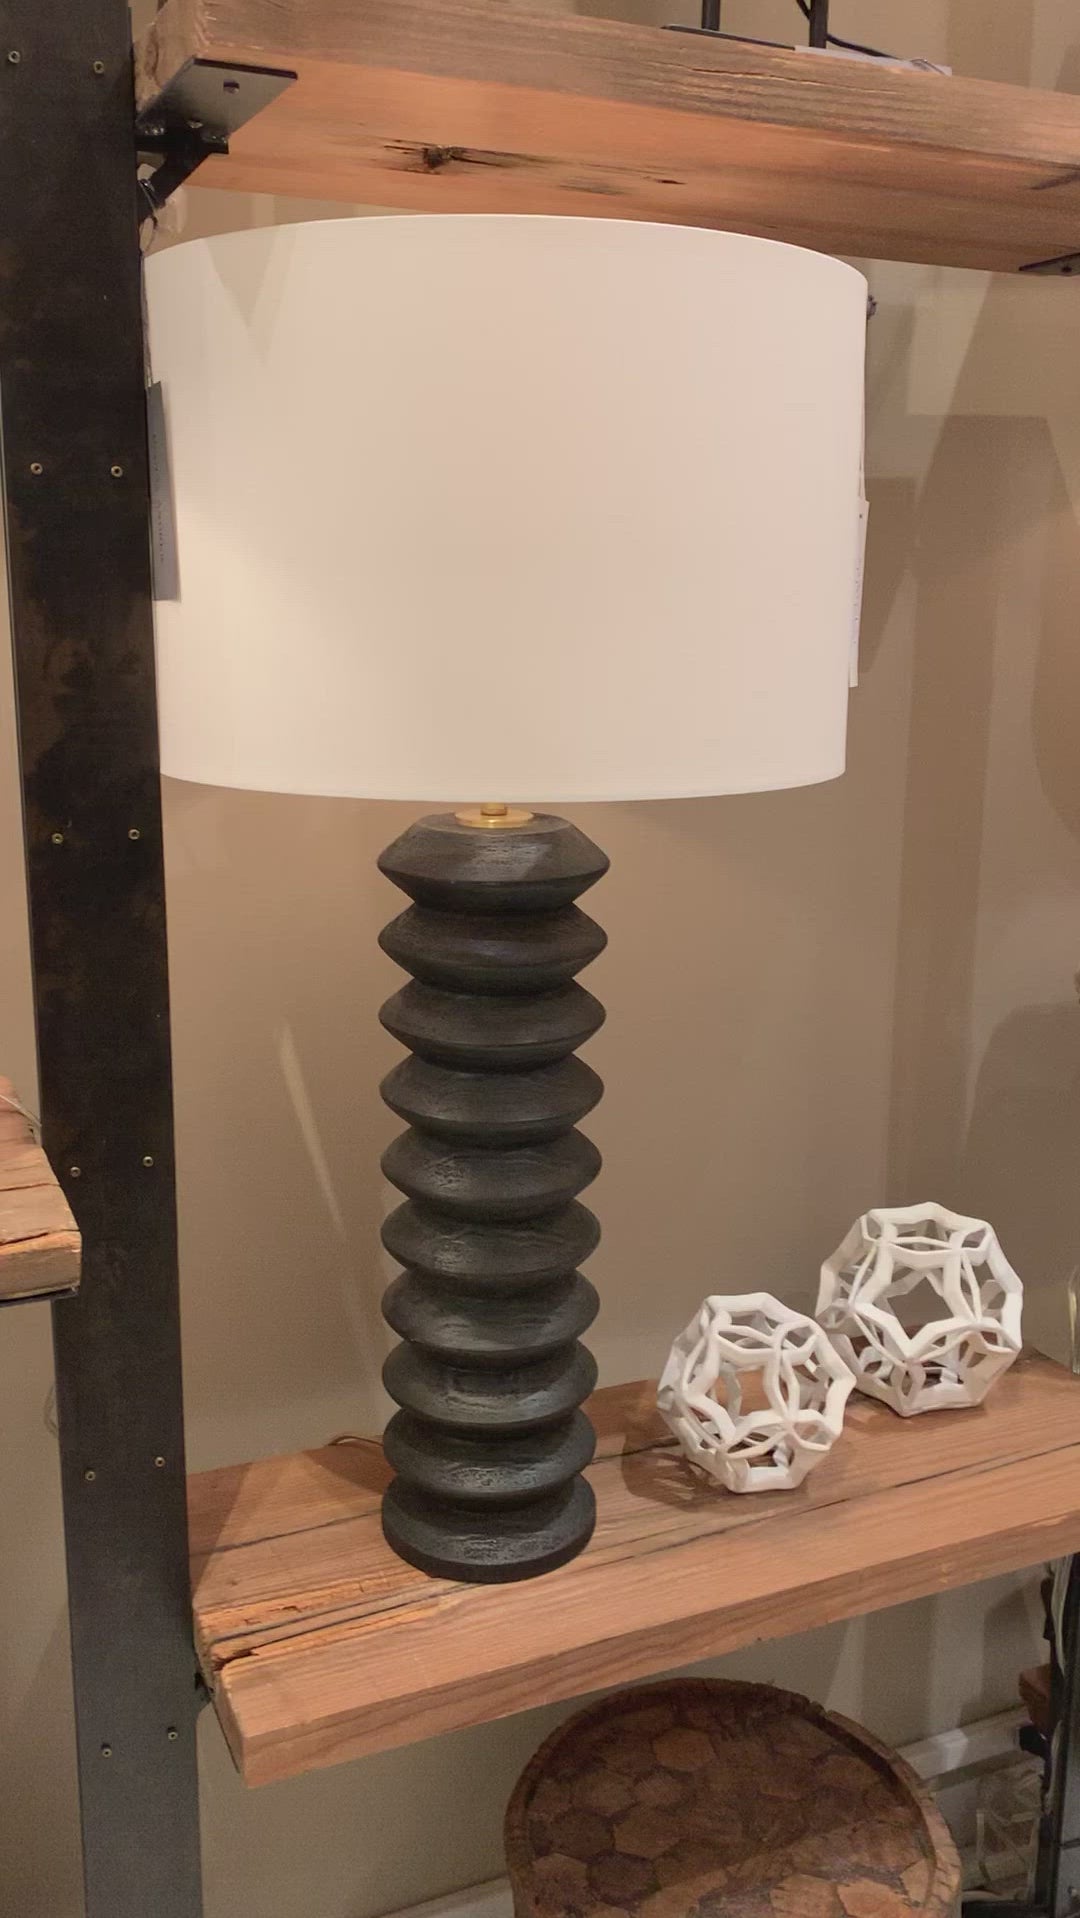 We love the groves found on this Accordion Table Lamp. Made from birch wood with a pronounced grain and ebony finish, this brings a sleek, modern look to any living room, bedroom, or other space.   Size: 17"w x 17"d x 33"h  Shade Dims: 17 x 17 x 11